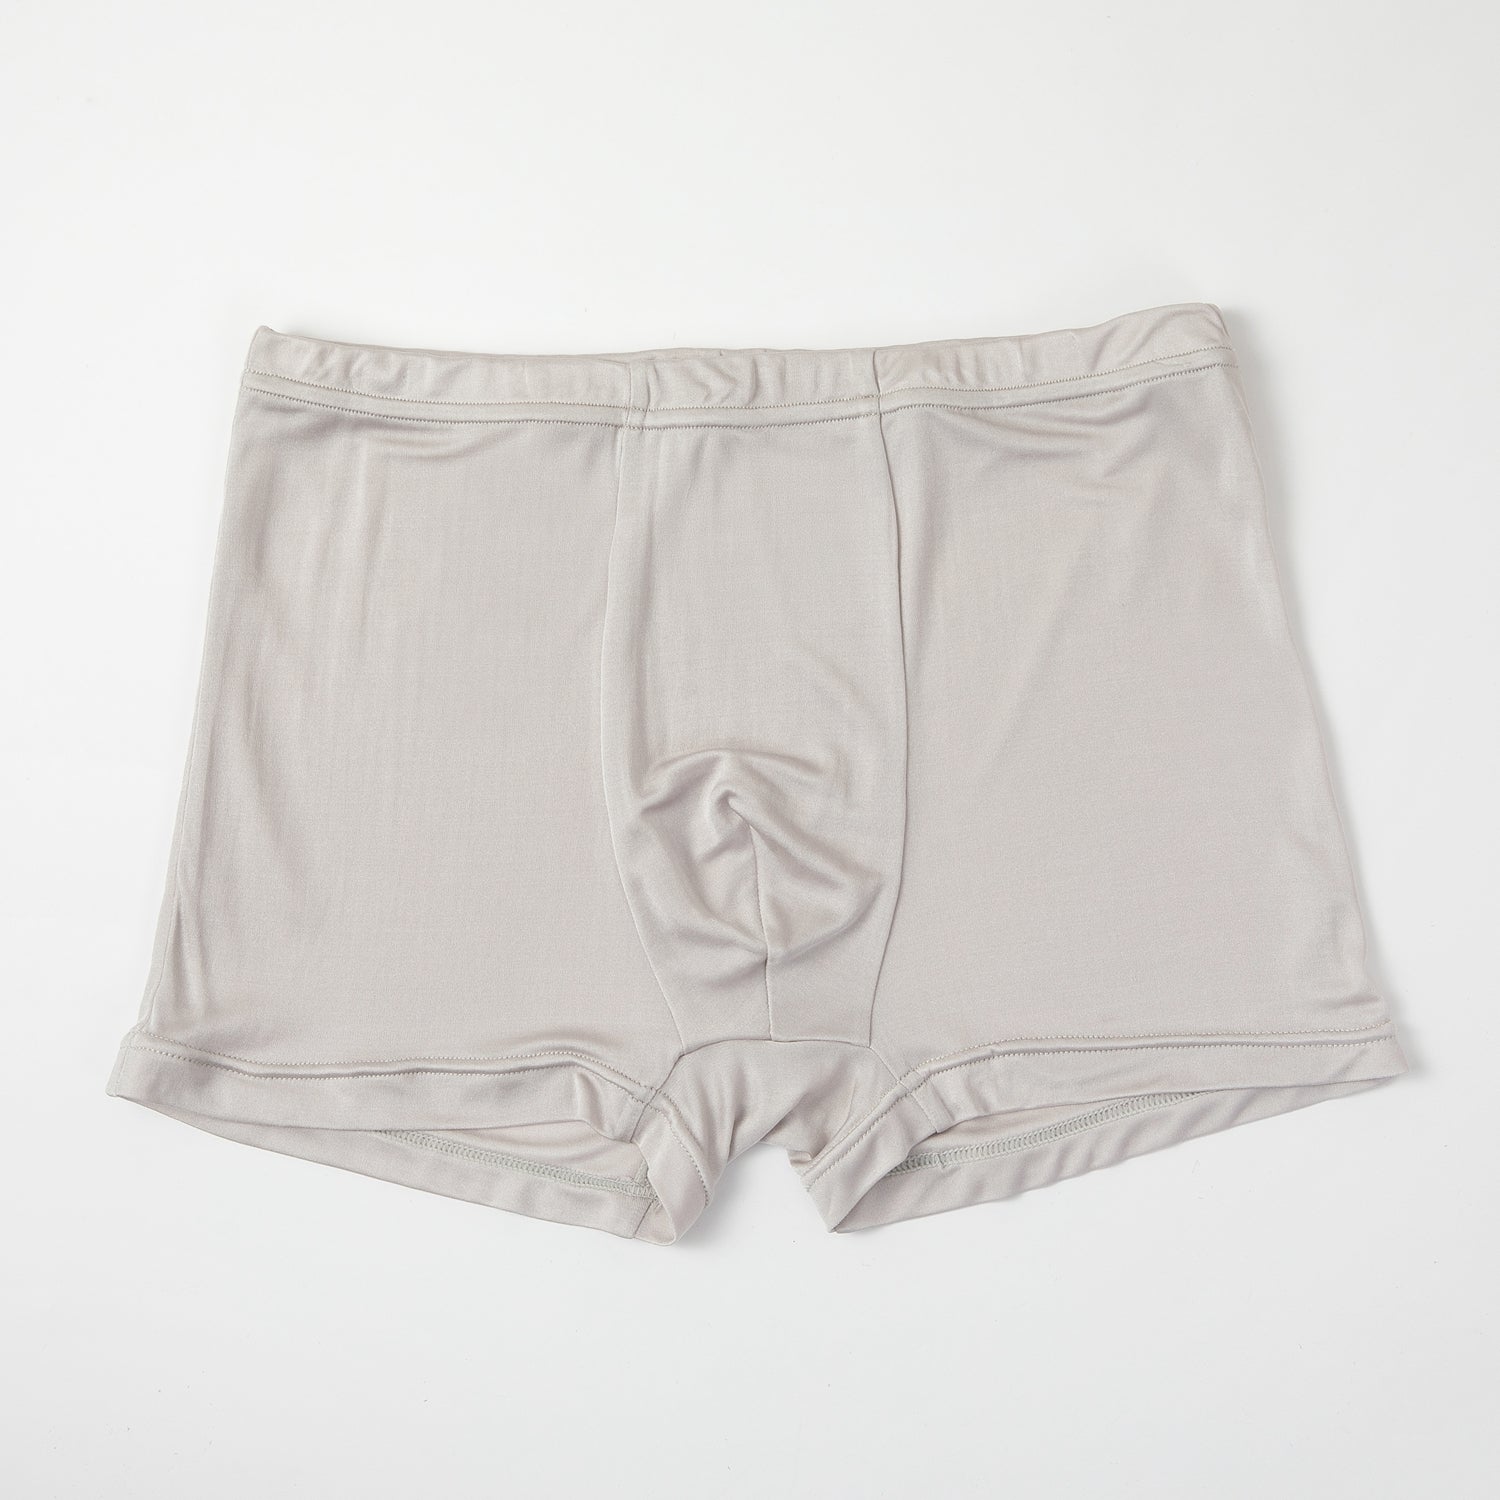 Silver Grey Knitted Silk Men's Trunks, Mid Rise